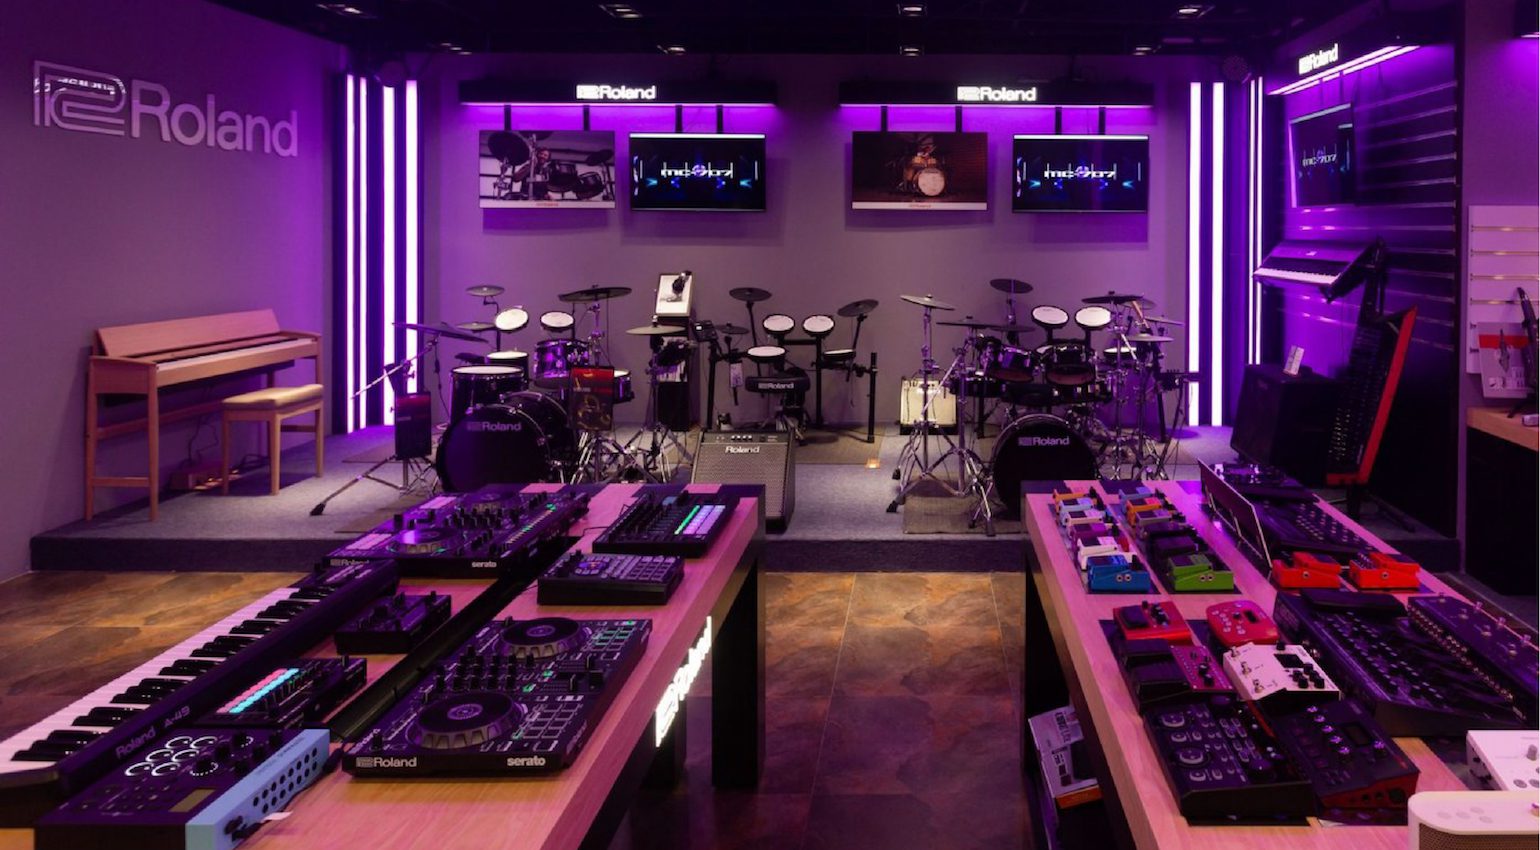 Inside the new Roland stores.